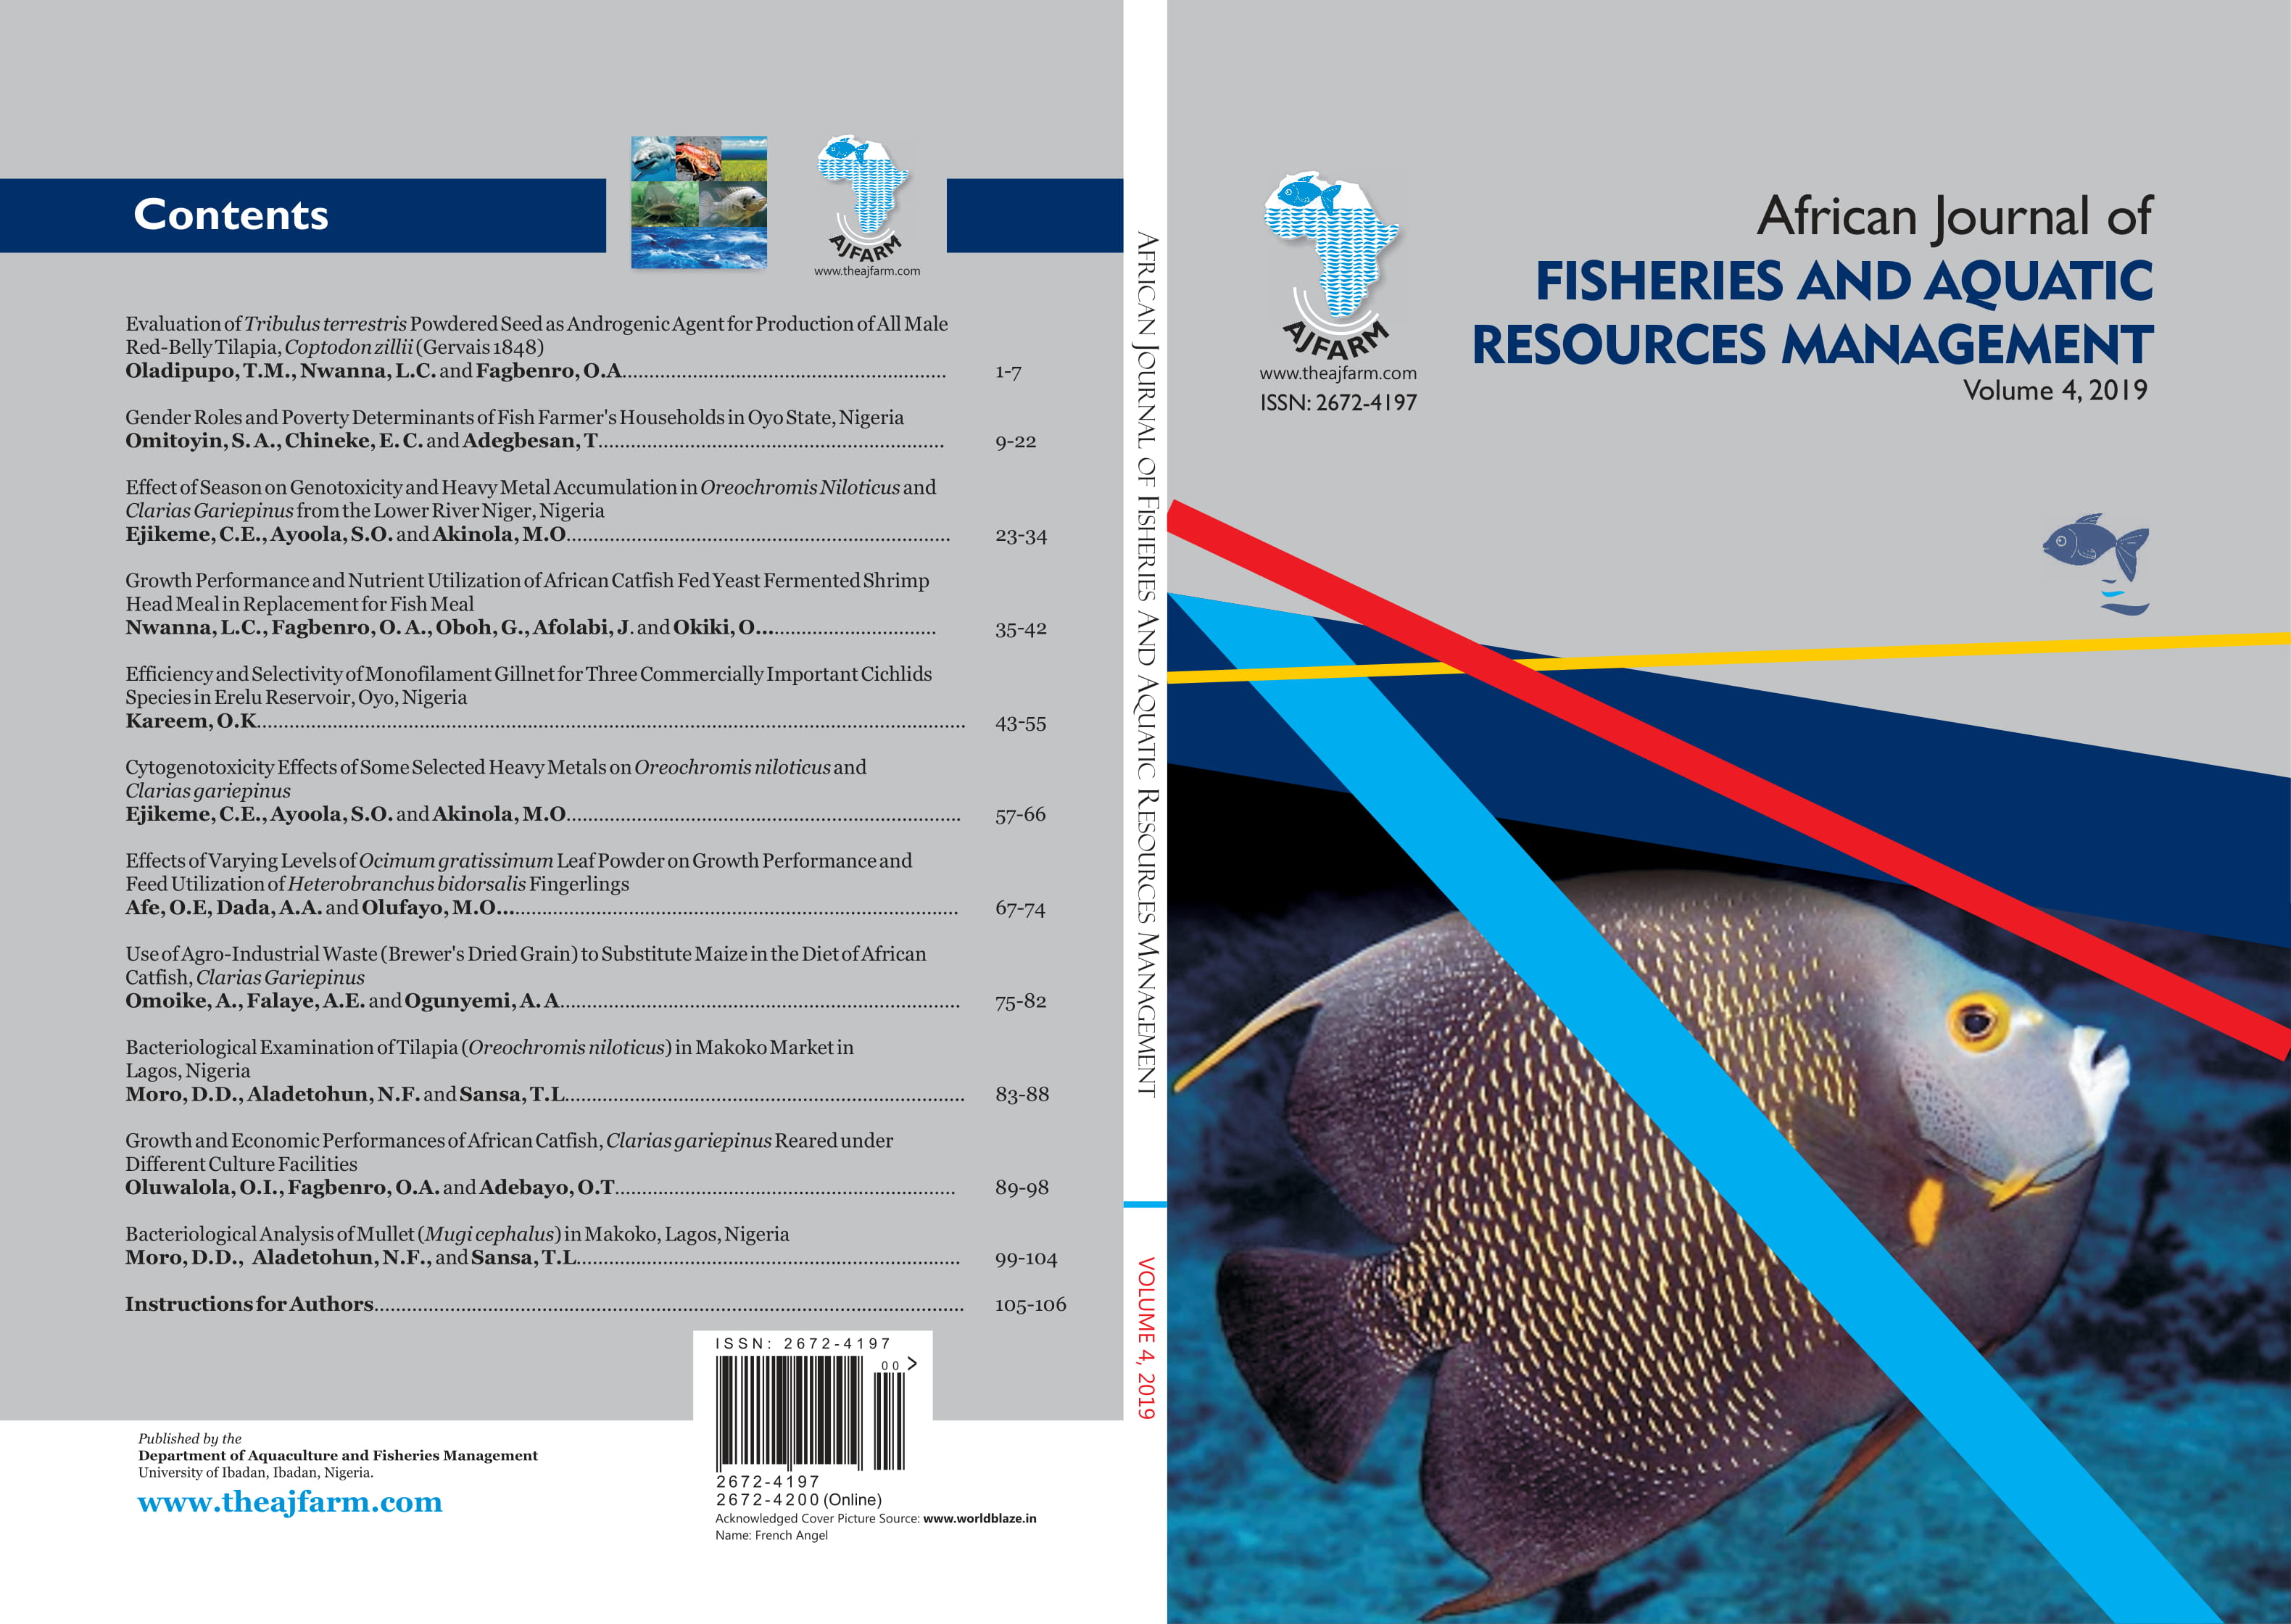 					View Vol. 4 No. 1 (2019): African Journal of FISHERIES AND AQUATIC RESOURCES MANAGEMENT
				